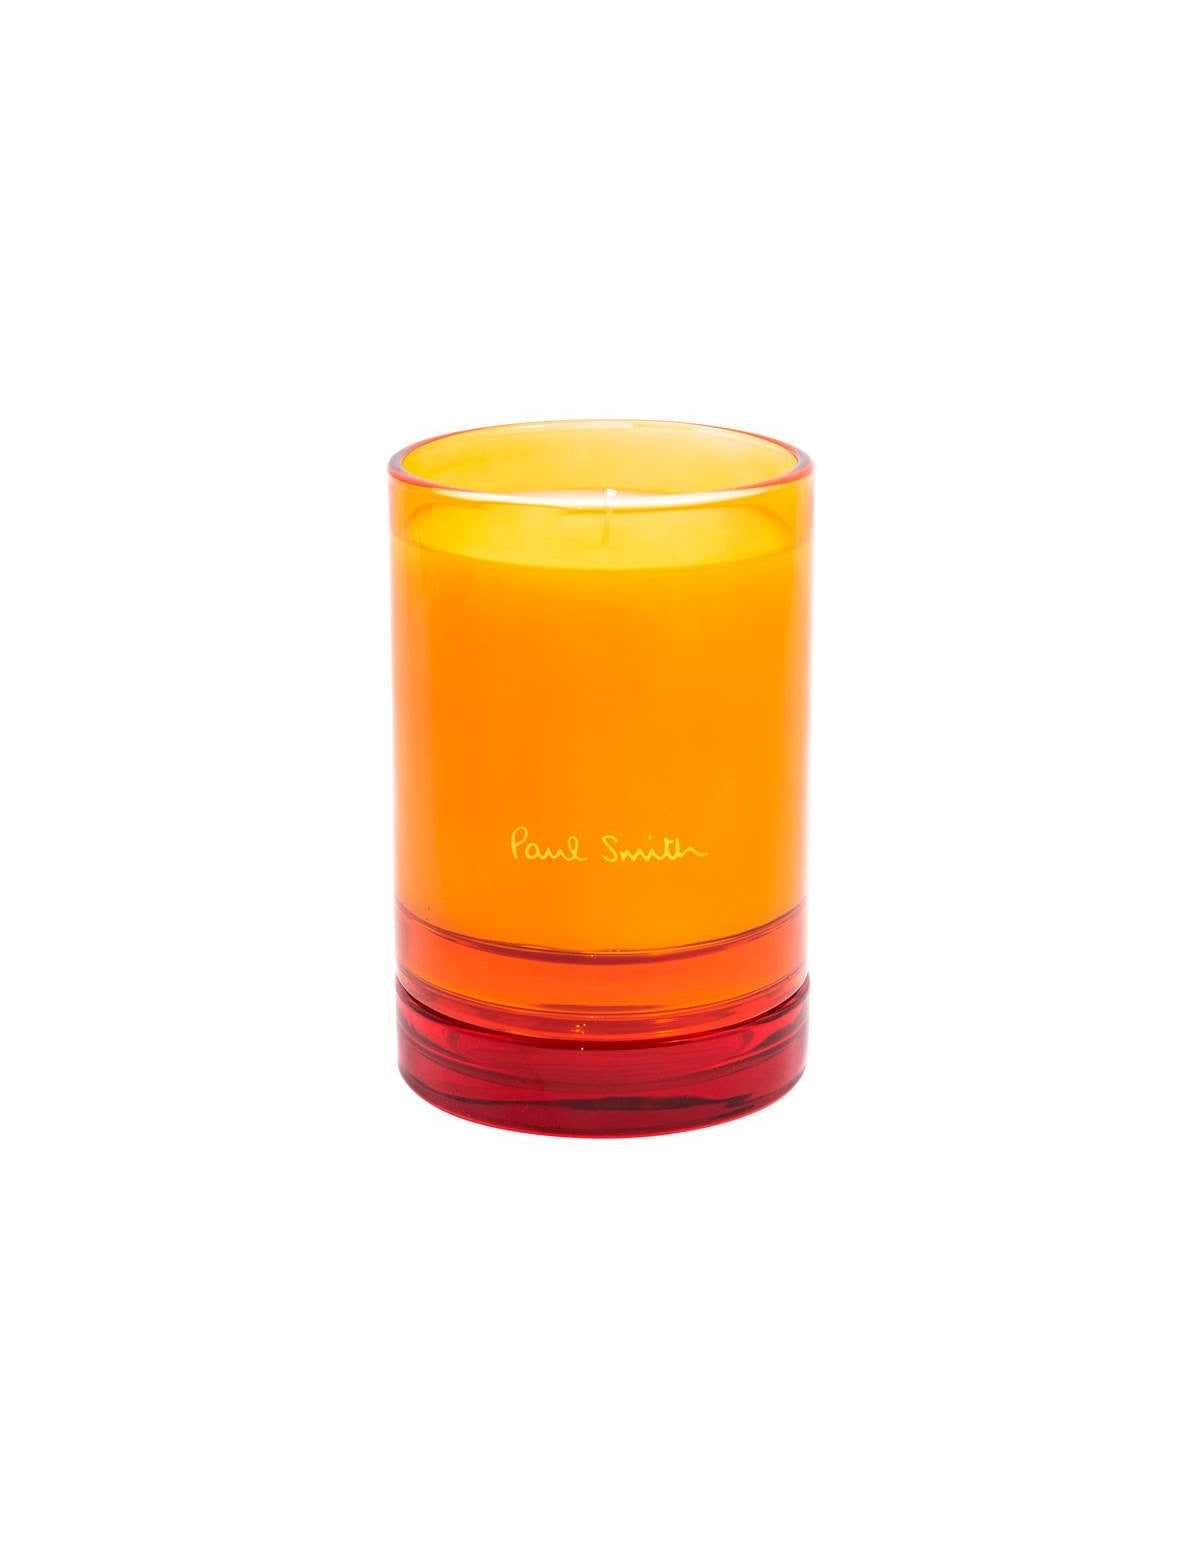 paul-smith-bookworm-scented-candle.jpg